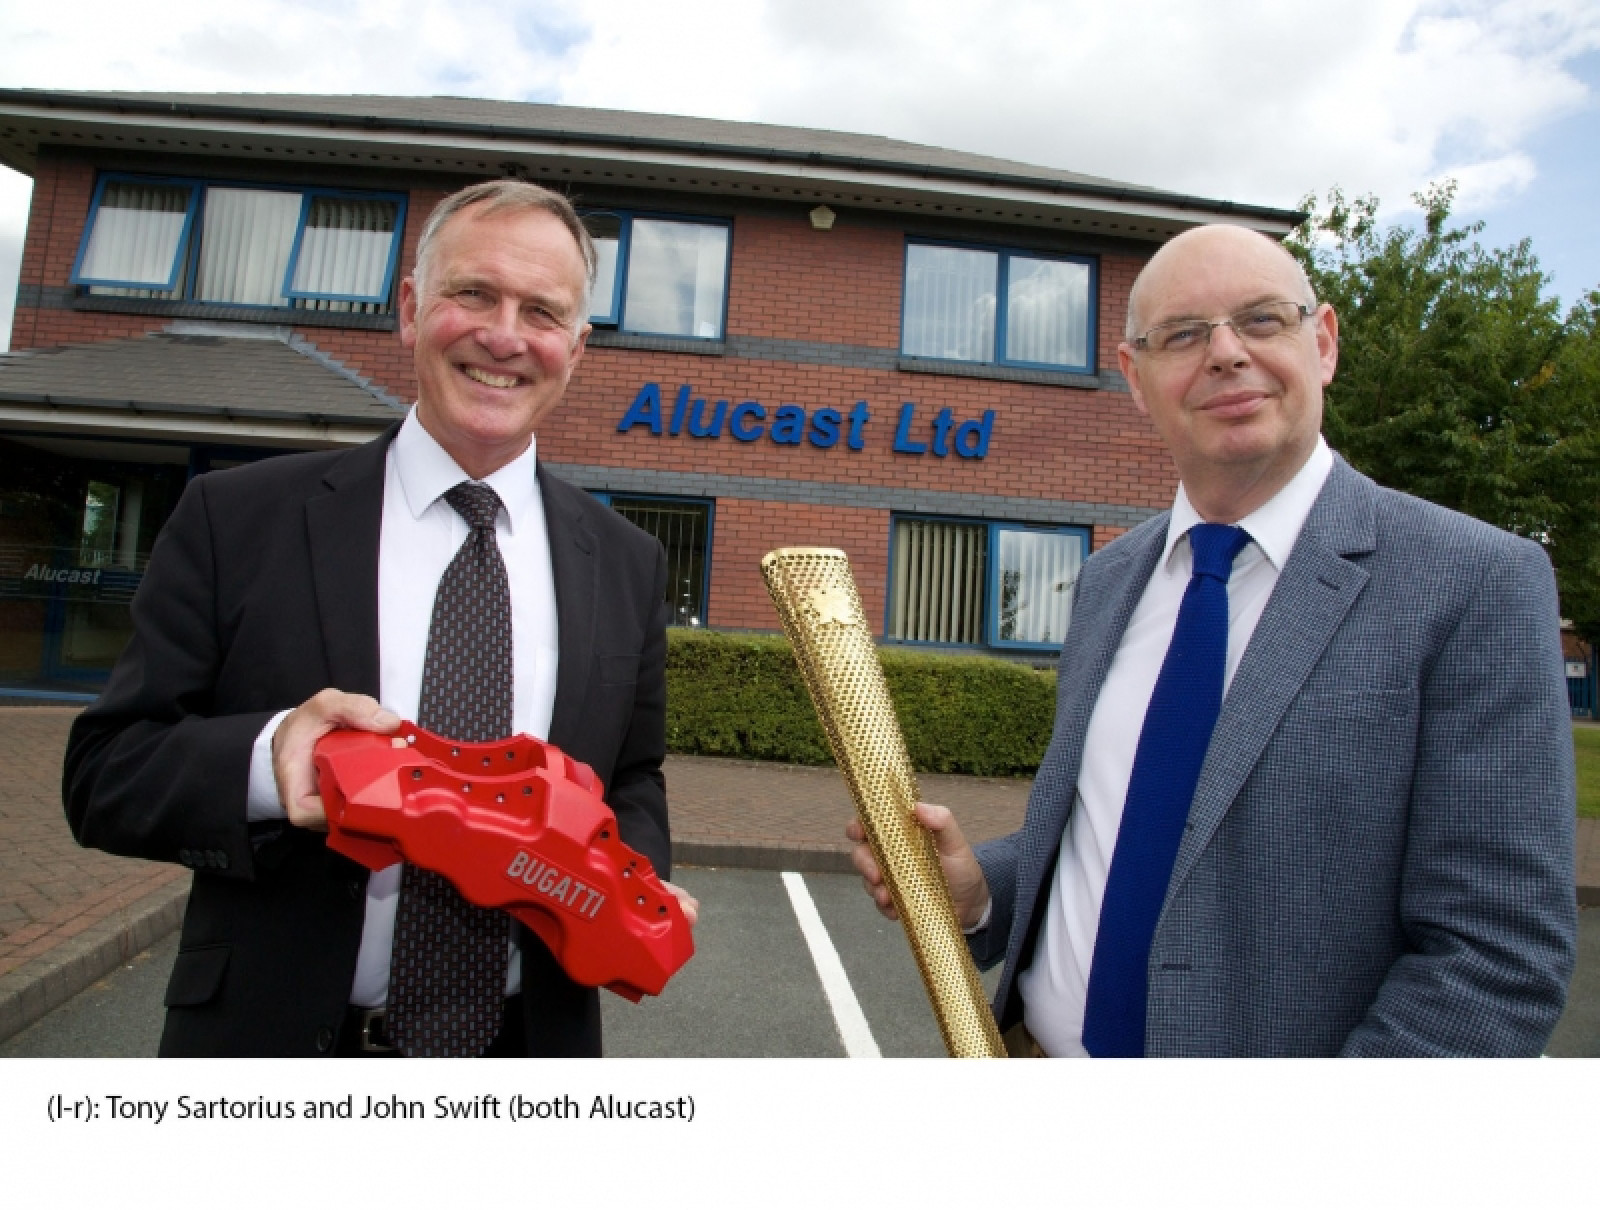 New software opens up £1m opportunity for Alucast